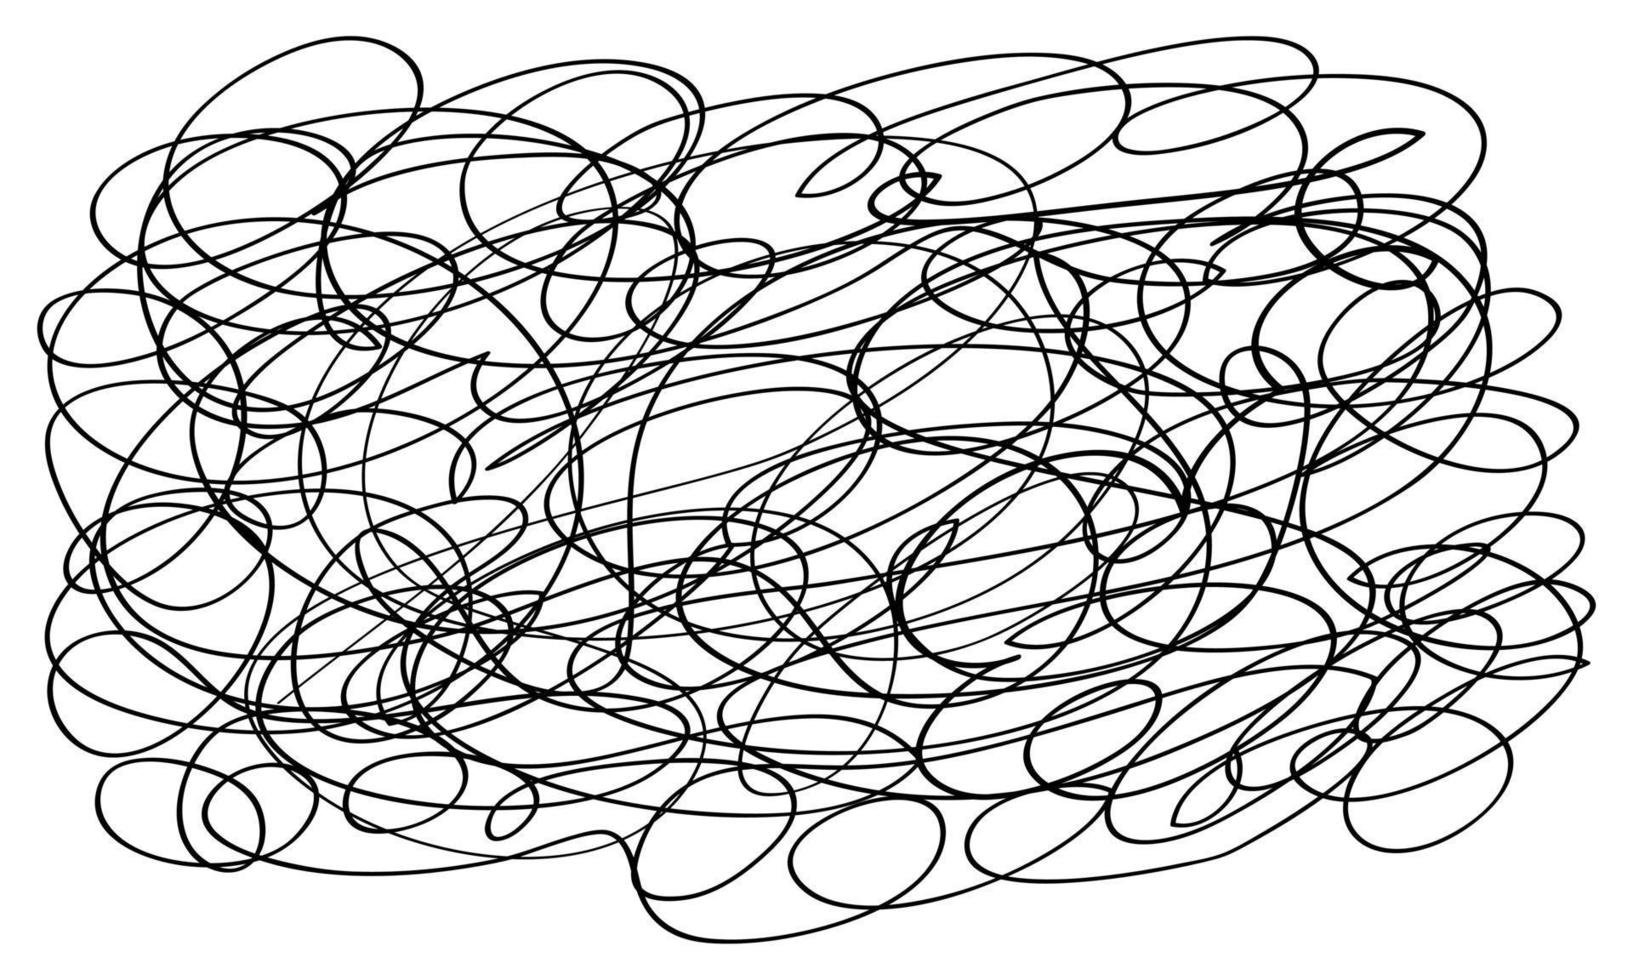 hand drawn abstract scribble doodle vector